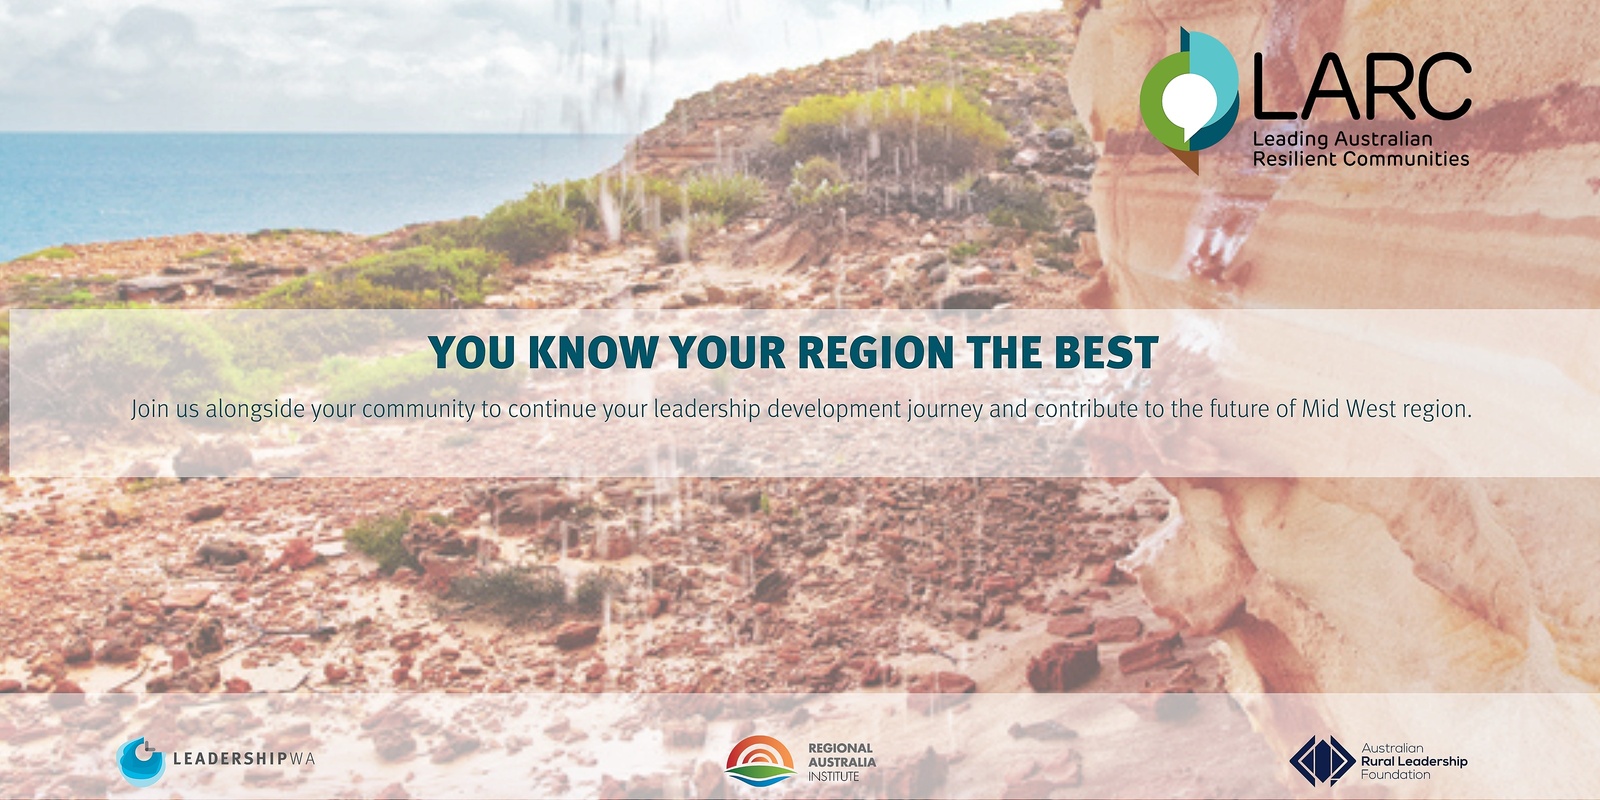 Banner image for Mid West Region: Leading Australian Resilient Communities: An afternoon of leadership, conversation and community connections